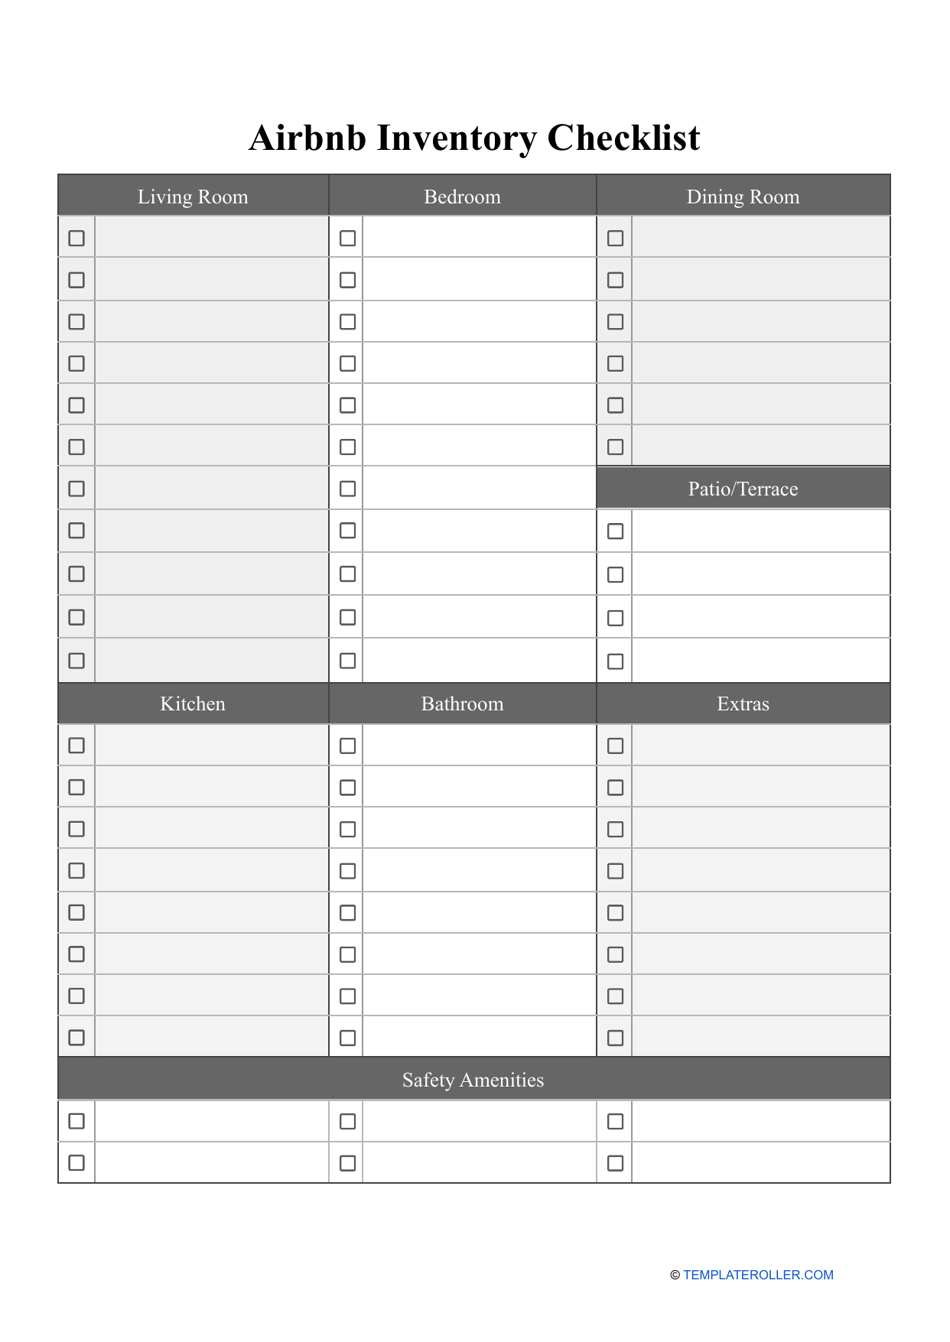 Airbnb Inventory Checklist Template, Page 1